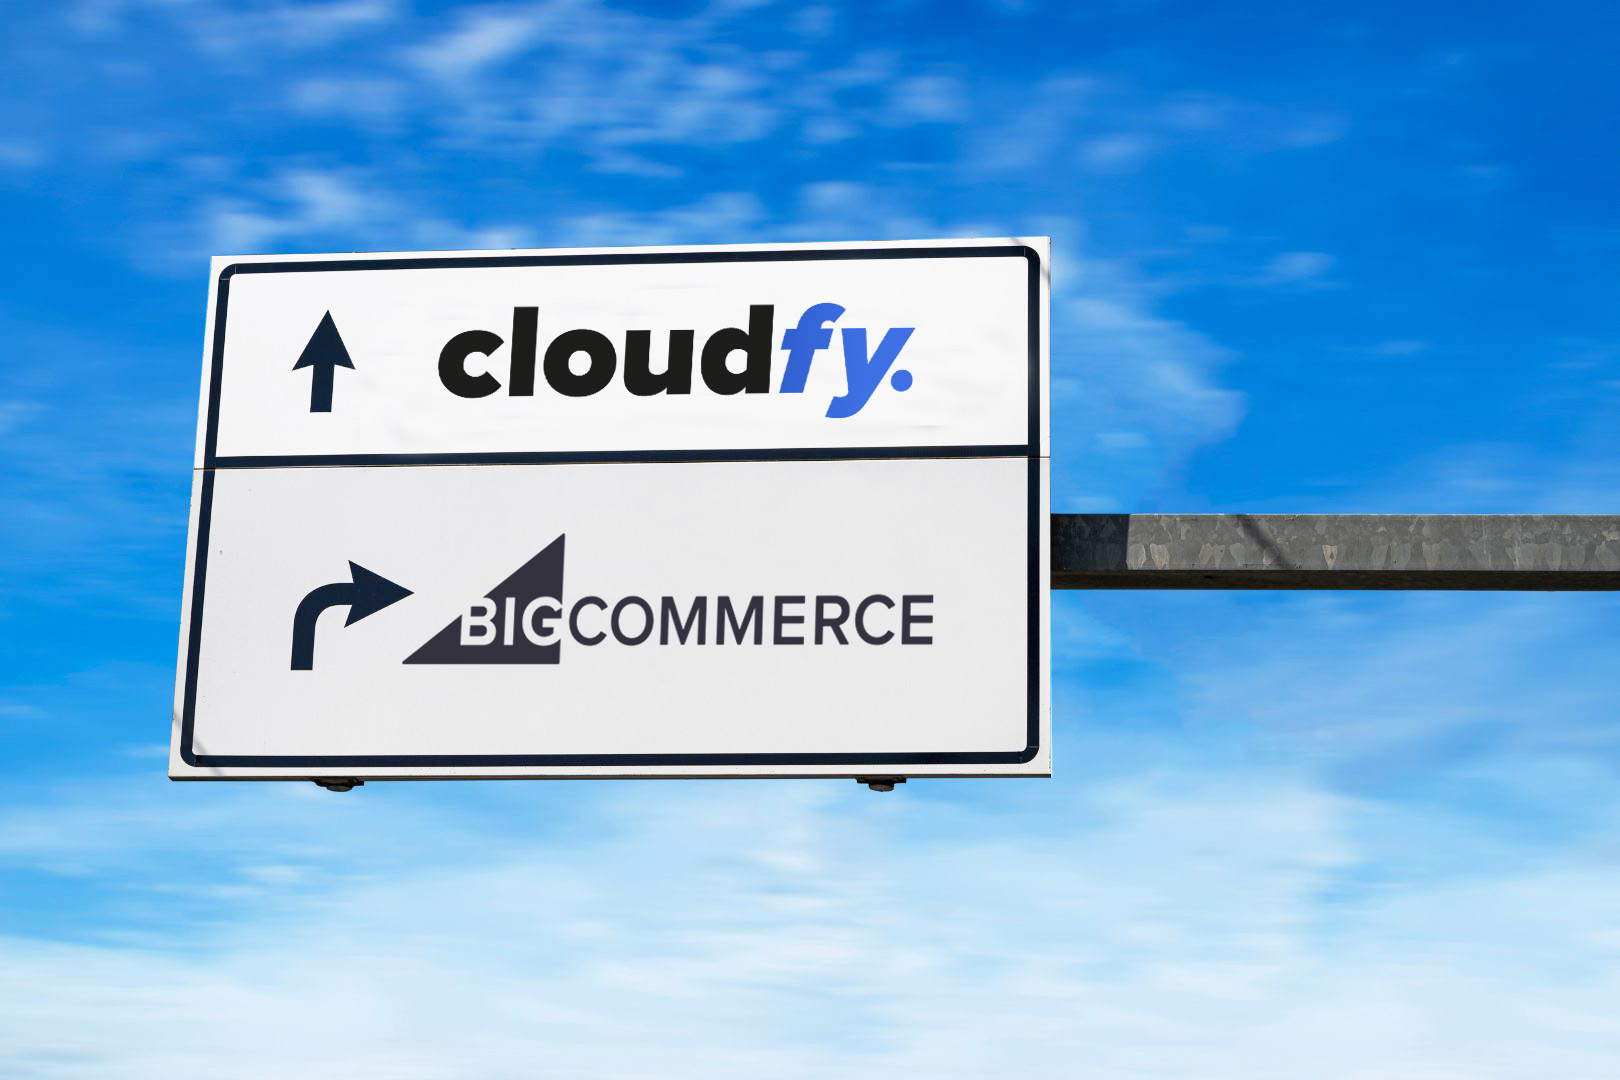 Cloudfy versus bigcommerce feature